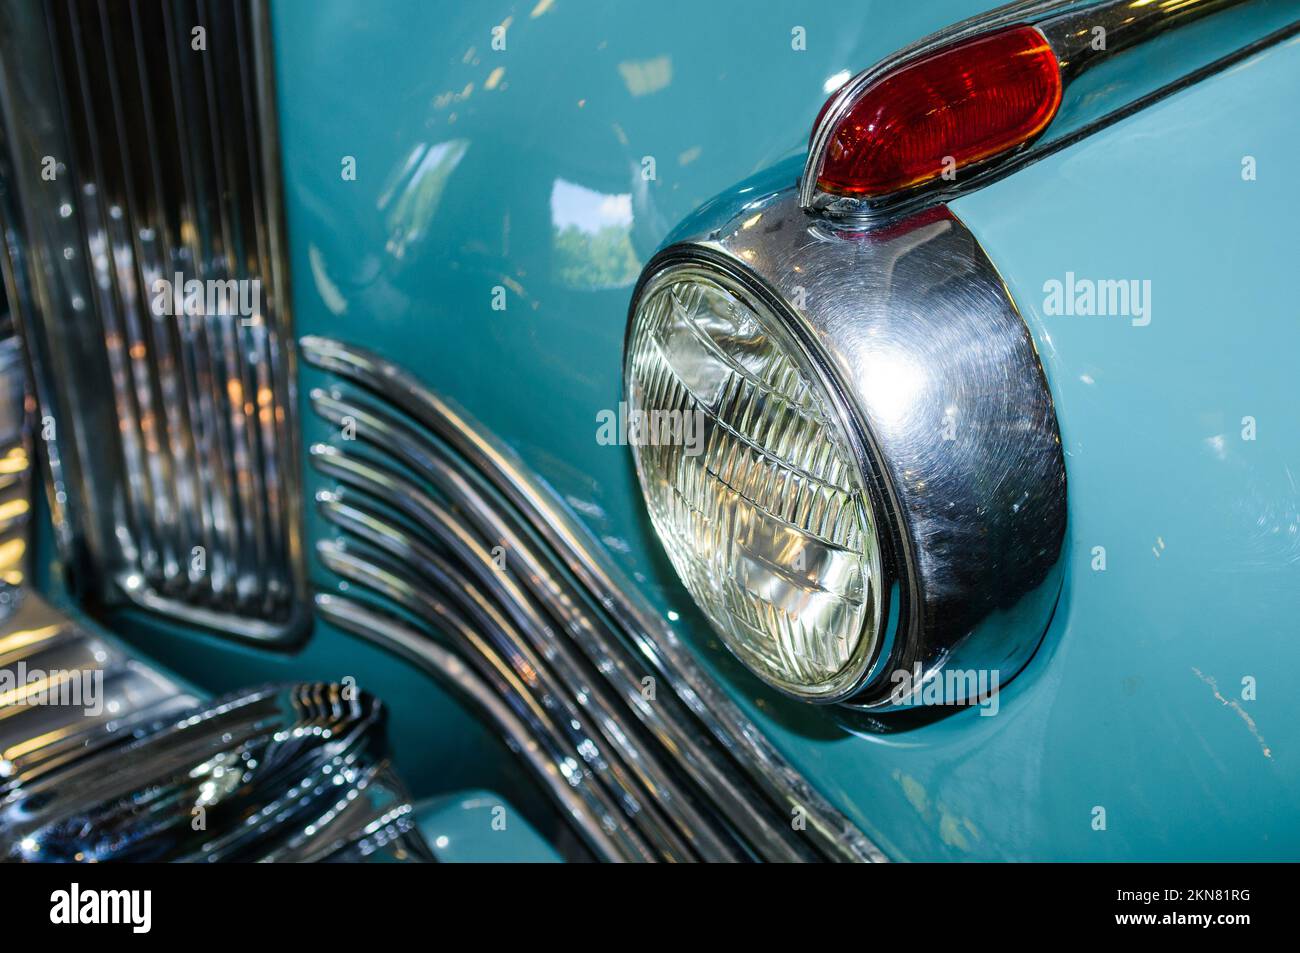 Detail of the front headlight of an old car in garage Stock Photo